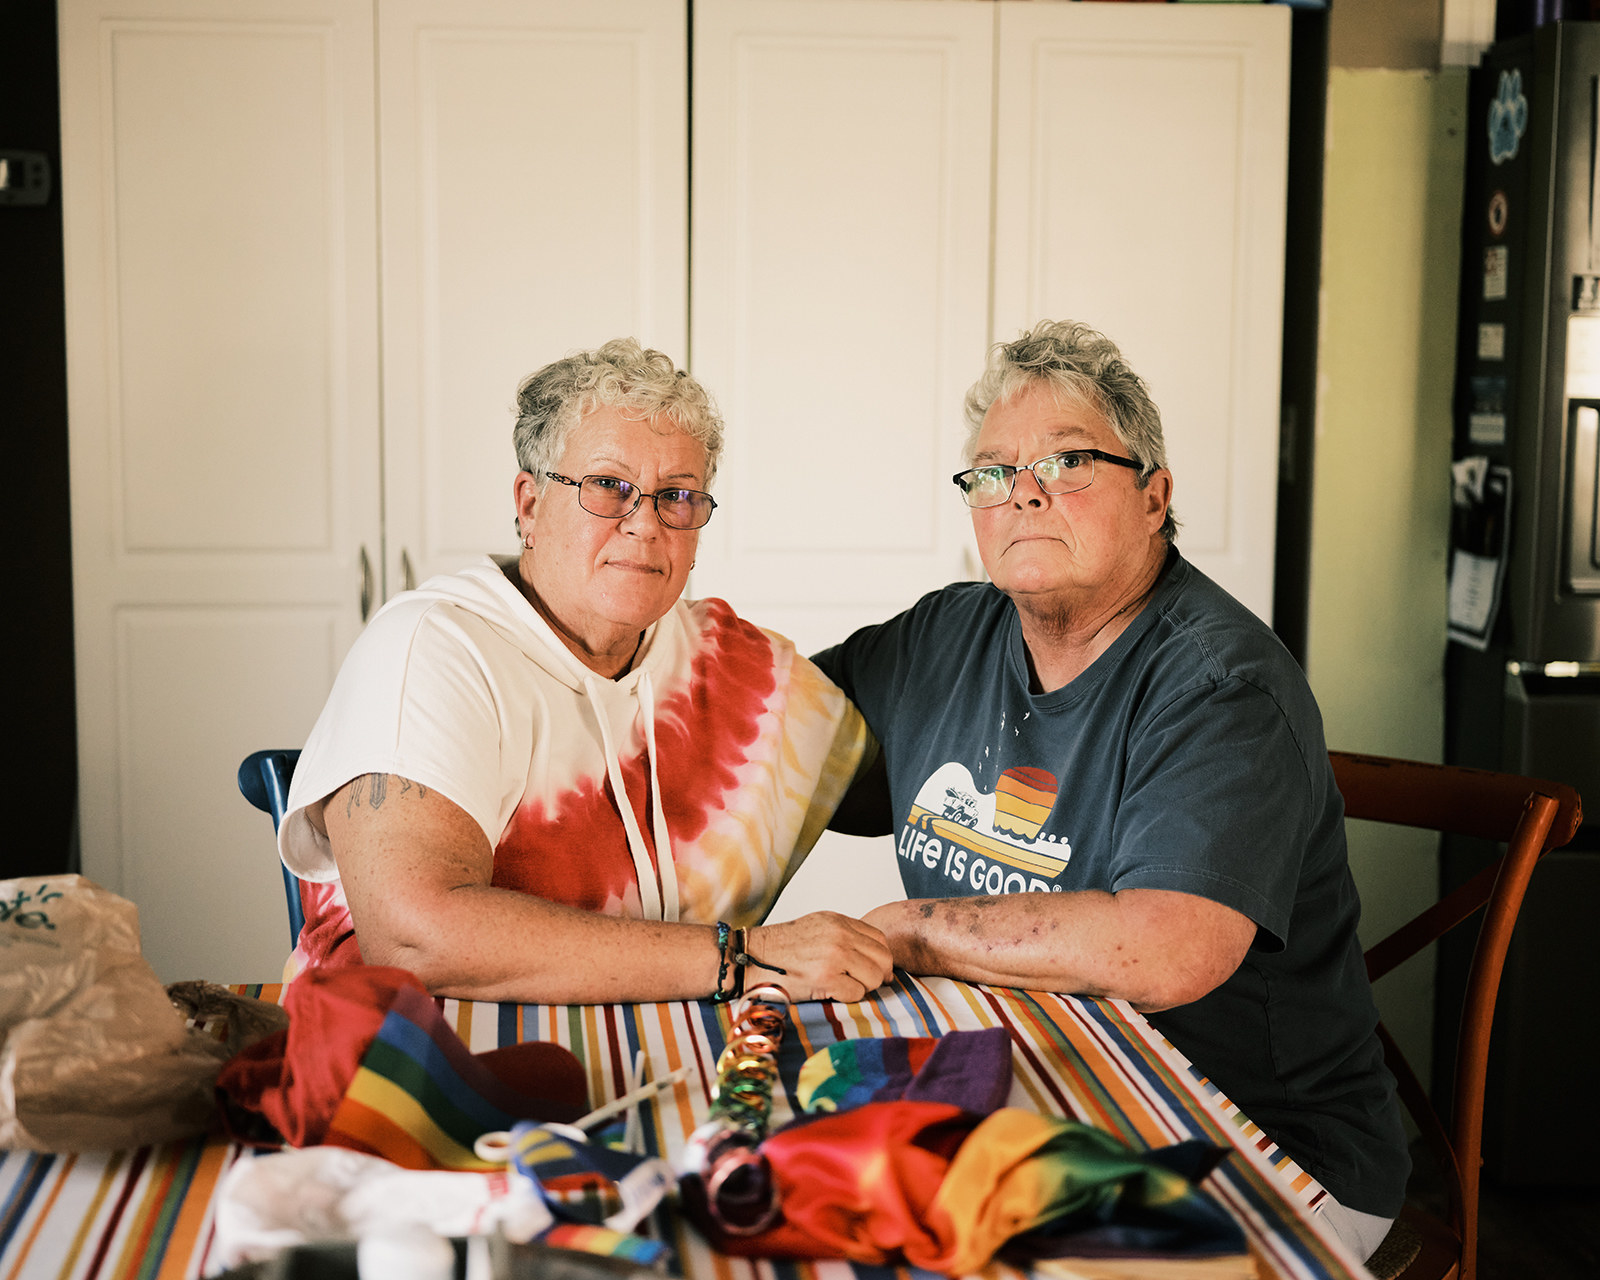 Gail Foreman and her wife, Pat Cummins, sitting at their kitchen table together. Cummins has her arm around Foreman. They both have short gray hair. Foreman has black wire-rim glasses and Cummins has rectangular dark frames.